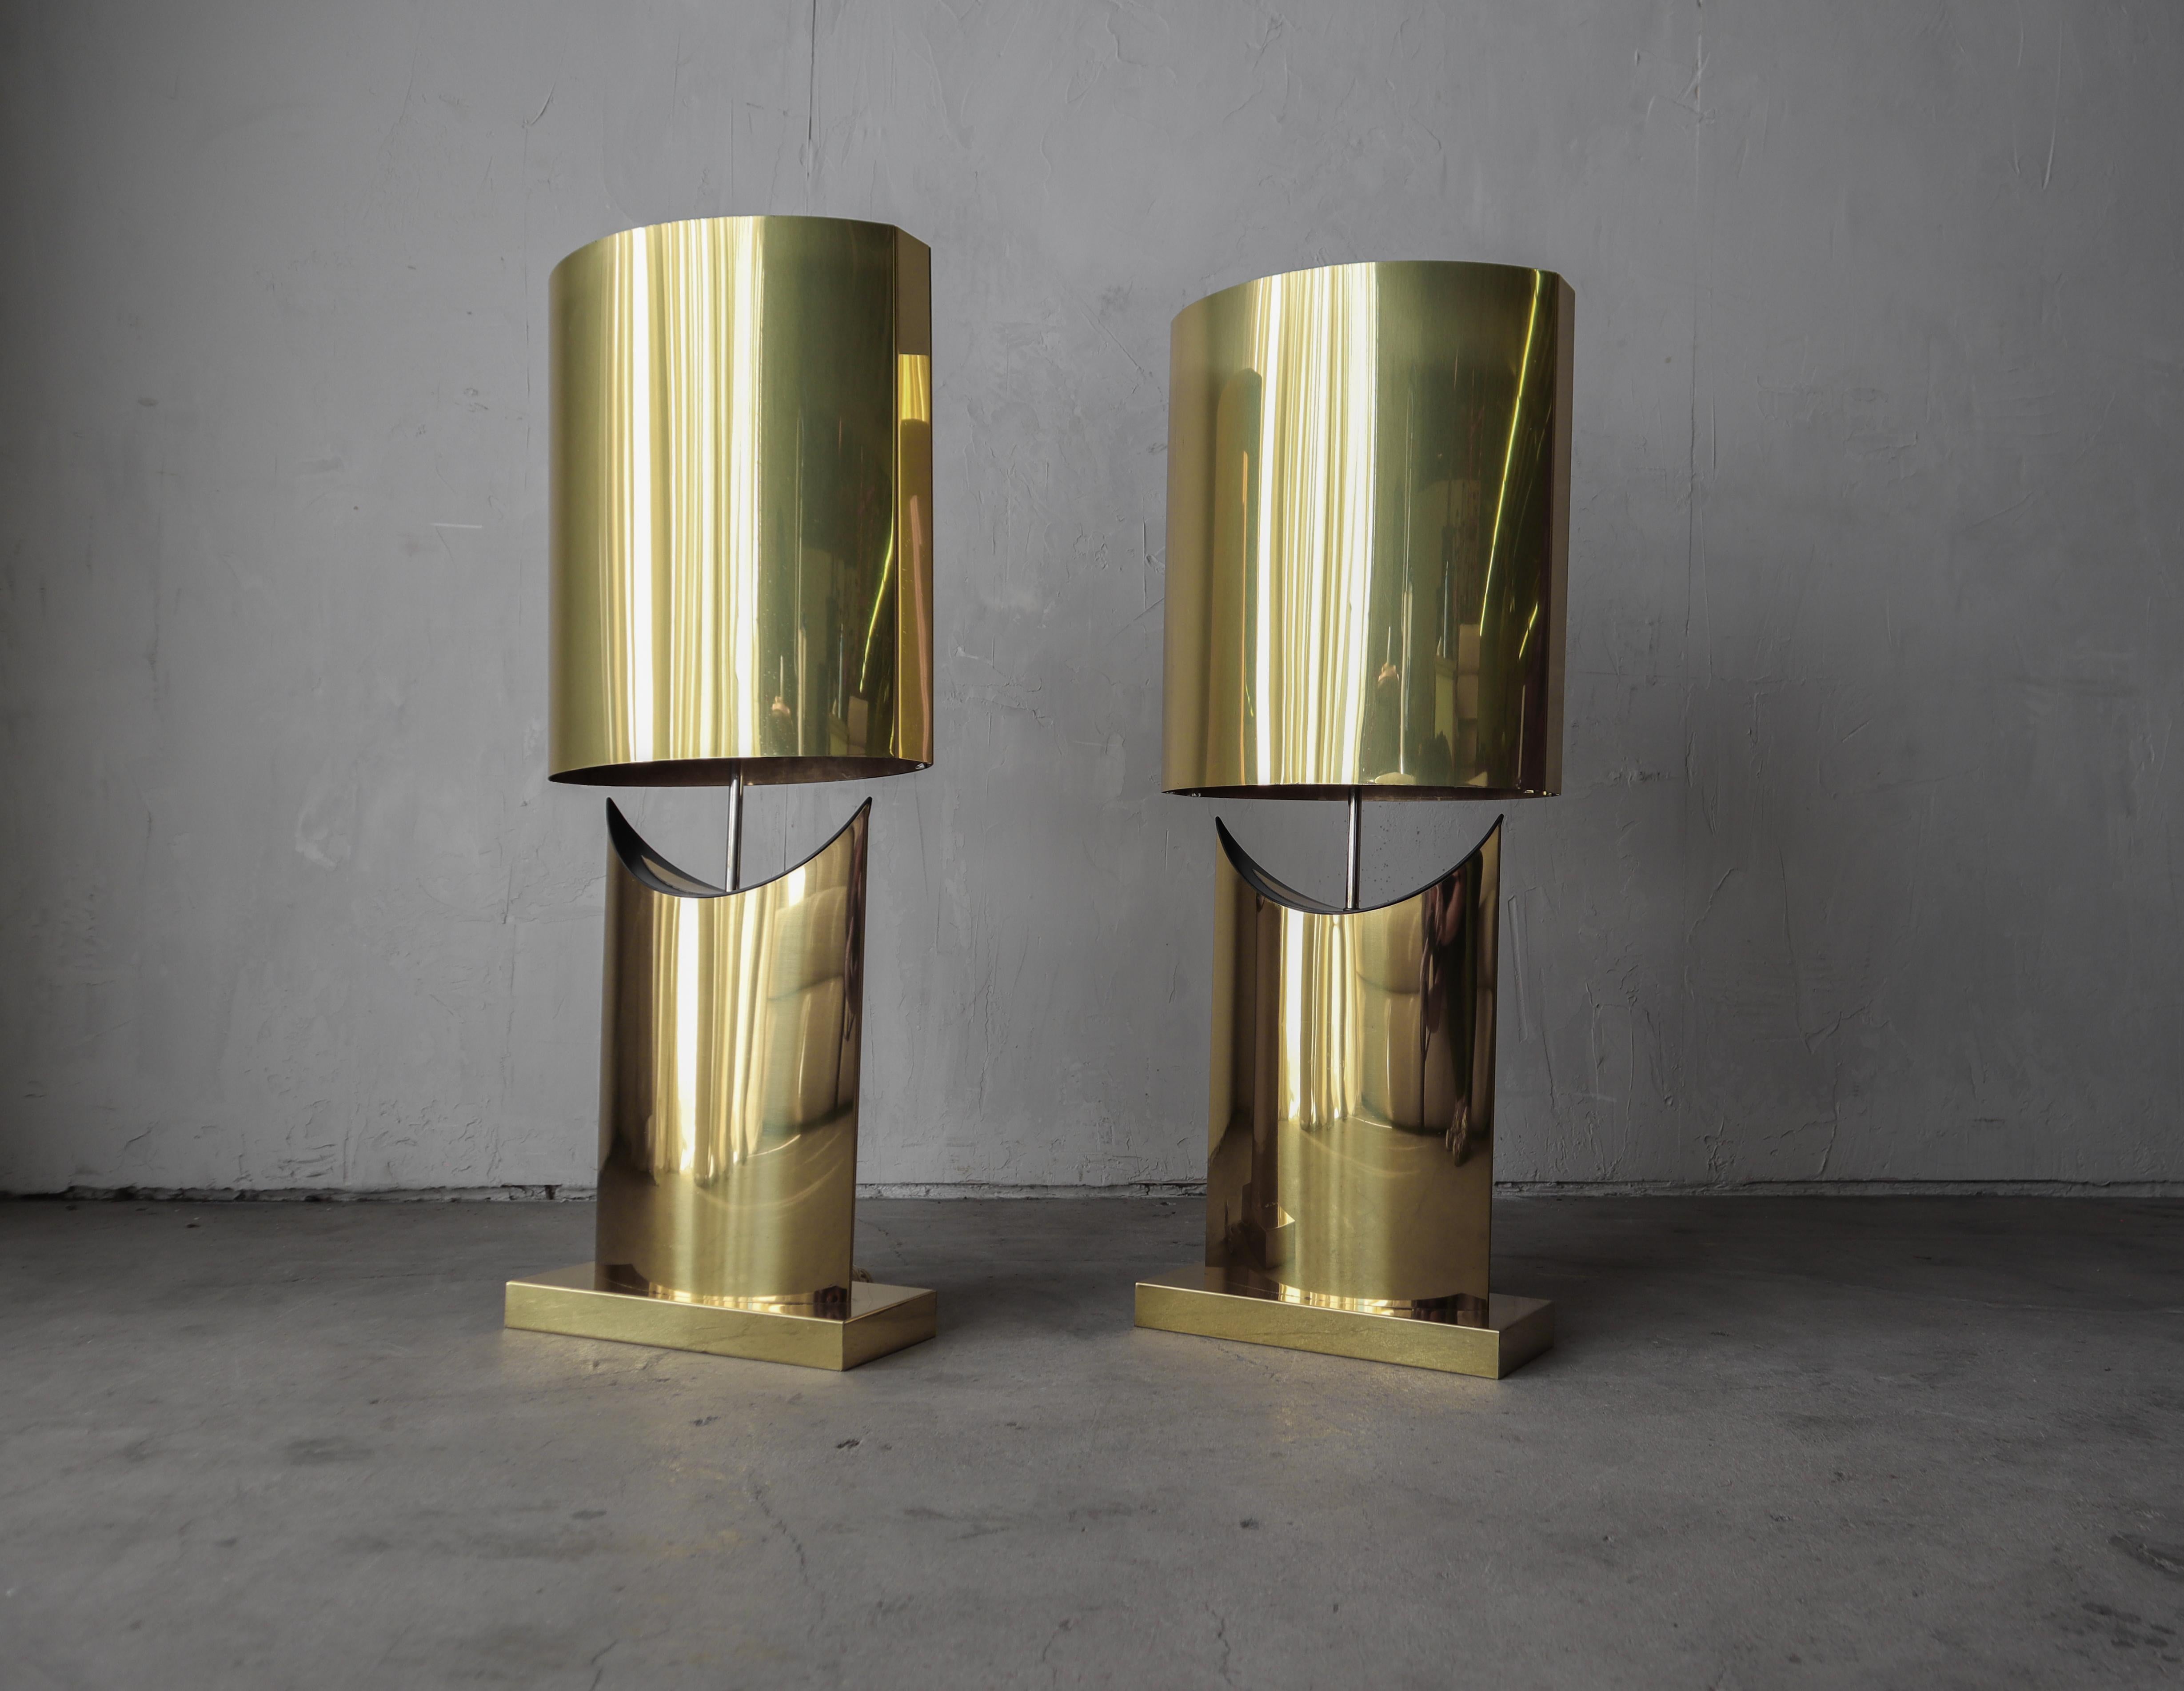 Absolutely stunning and very large pair of brass table lamps by Curtis Jere.  These lamps command attention serving both form and function with their sculptural shape and warm brass color.

Lamps are in excellent condition overall showing very